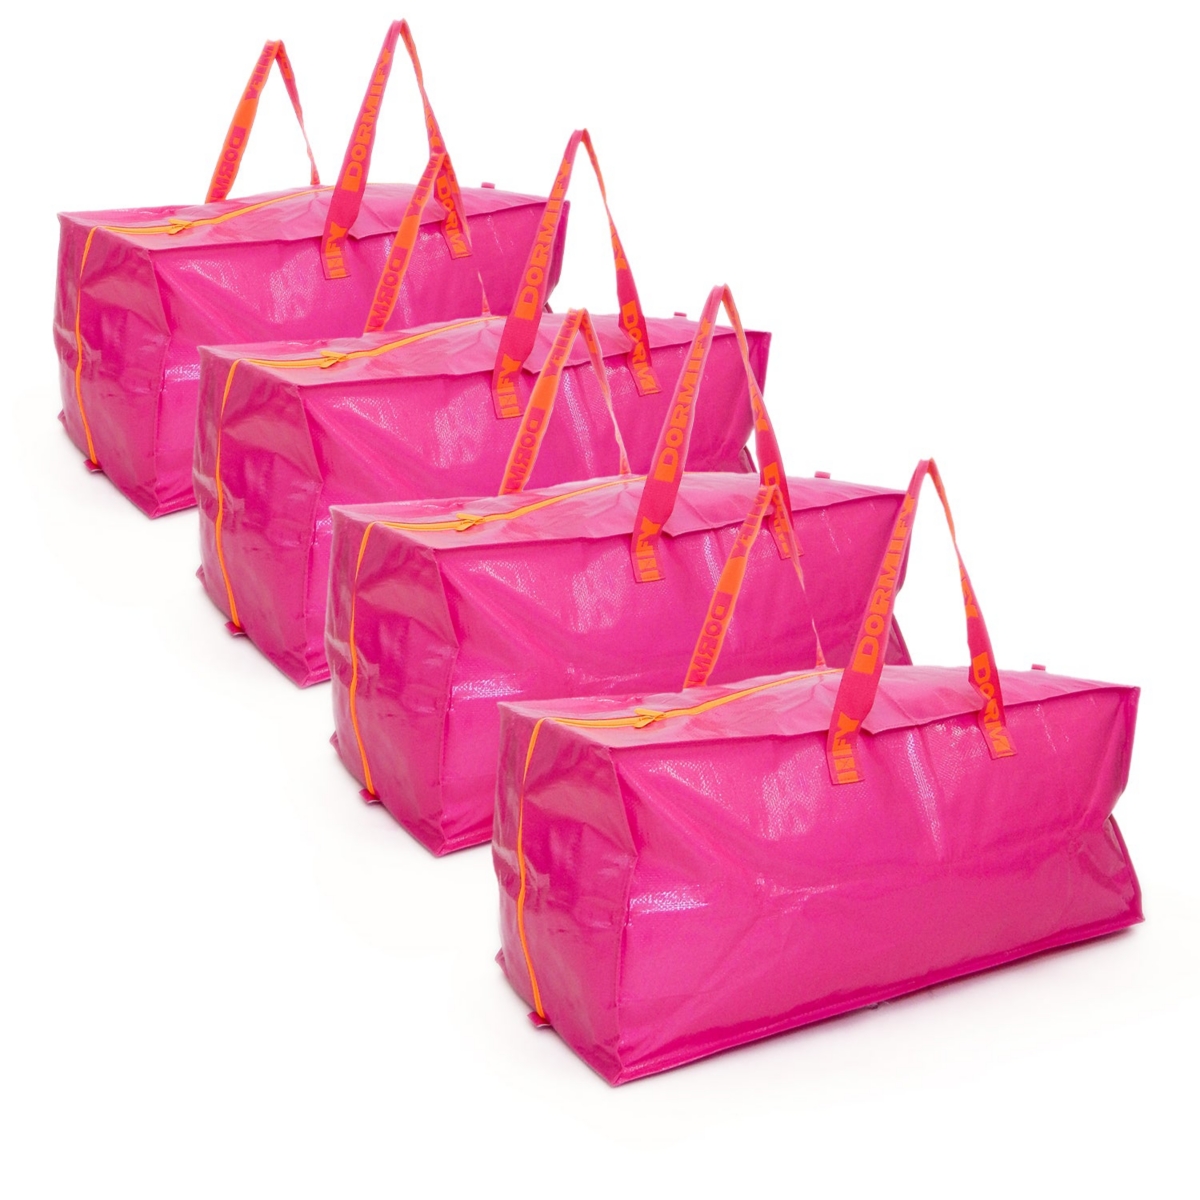 Storage Duffle Bag for College Dorms - Pink